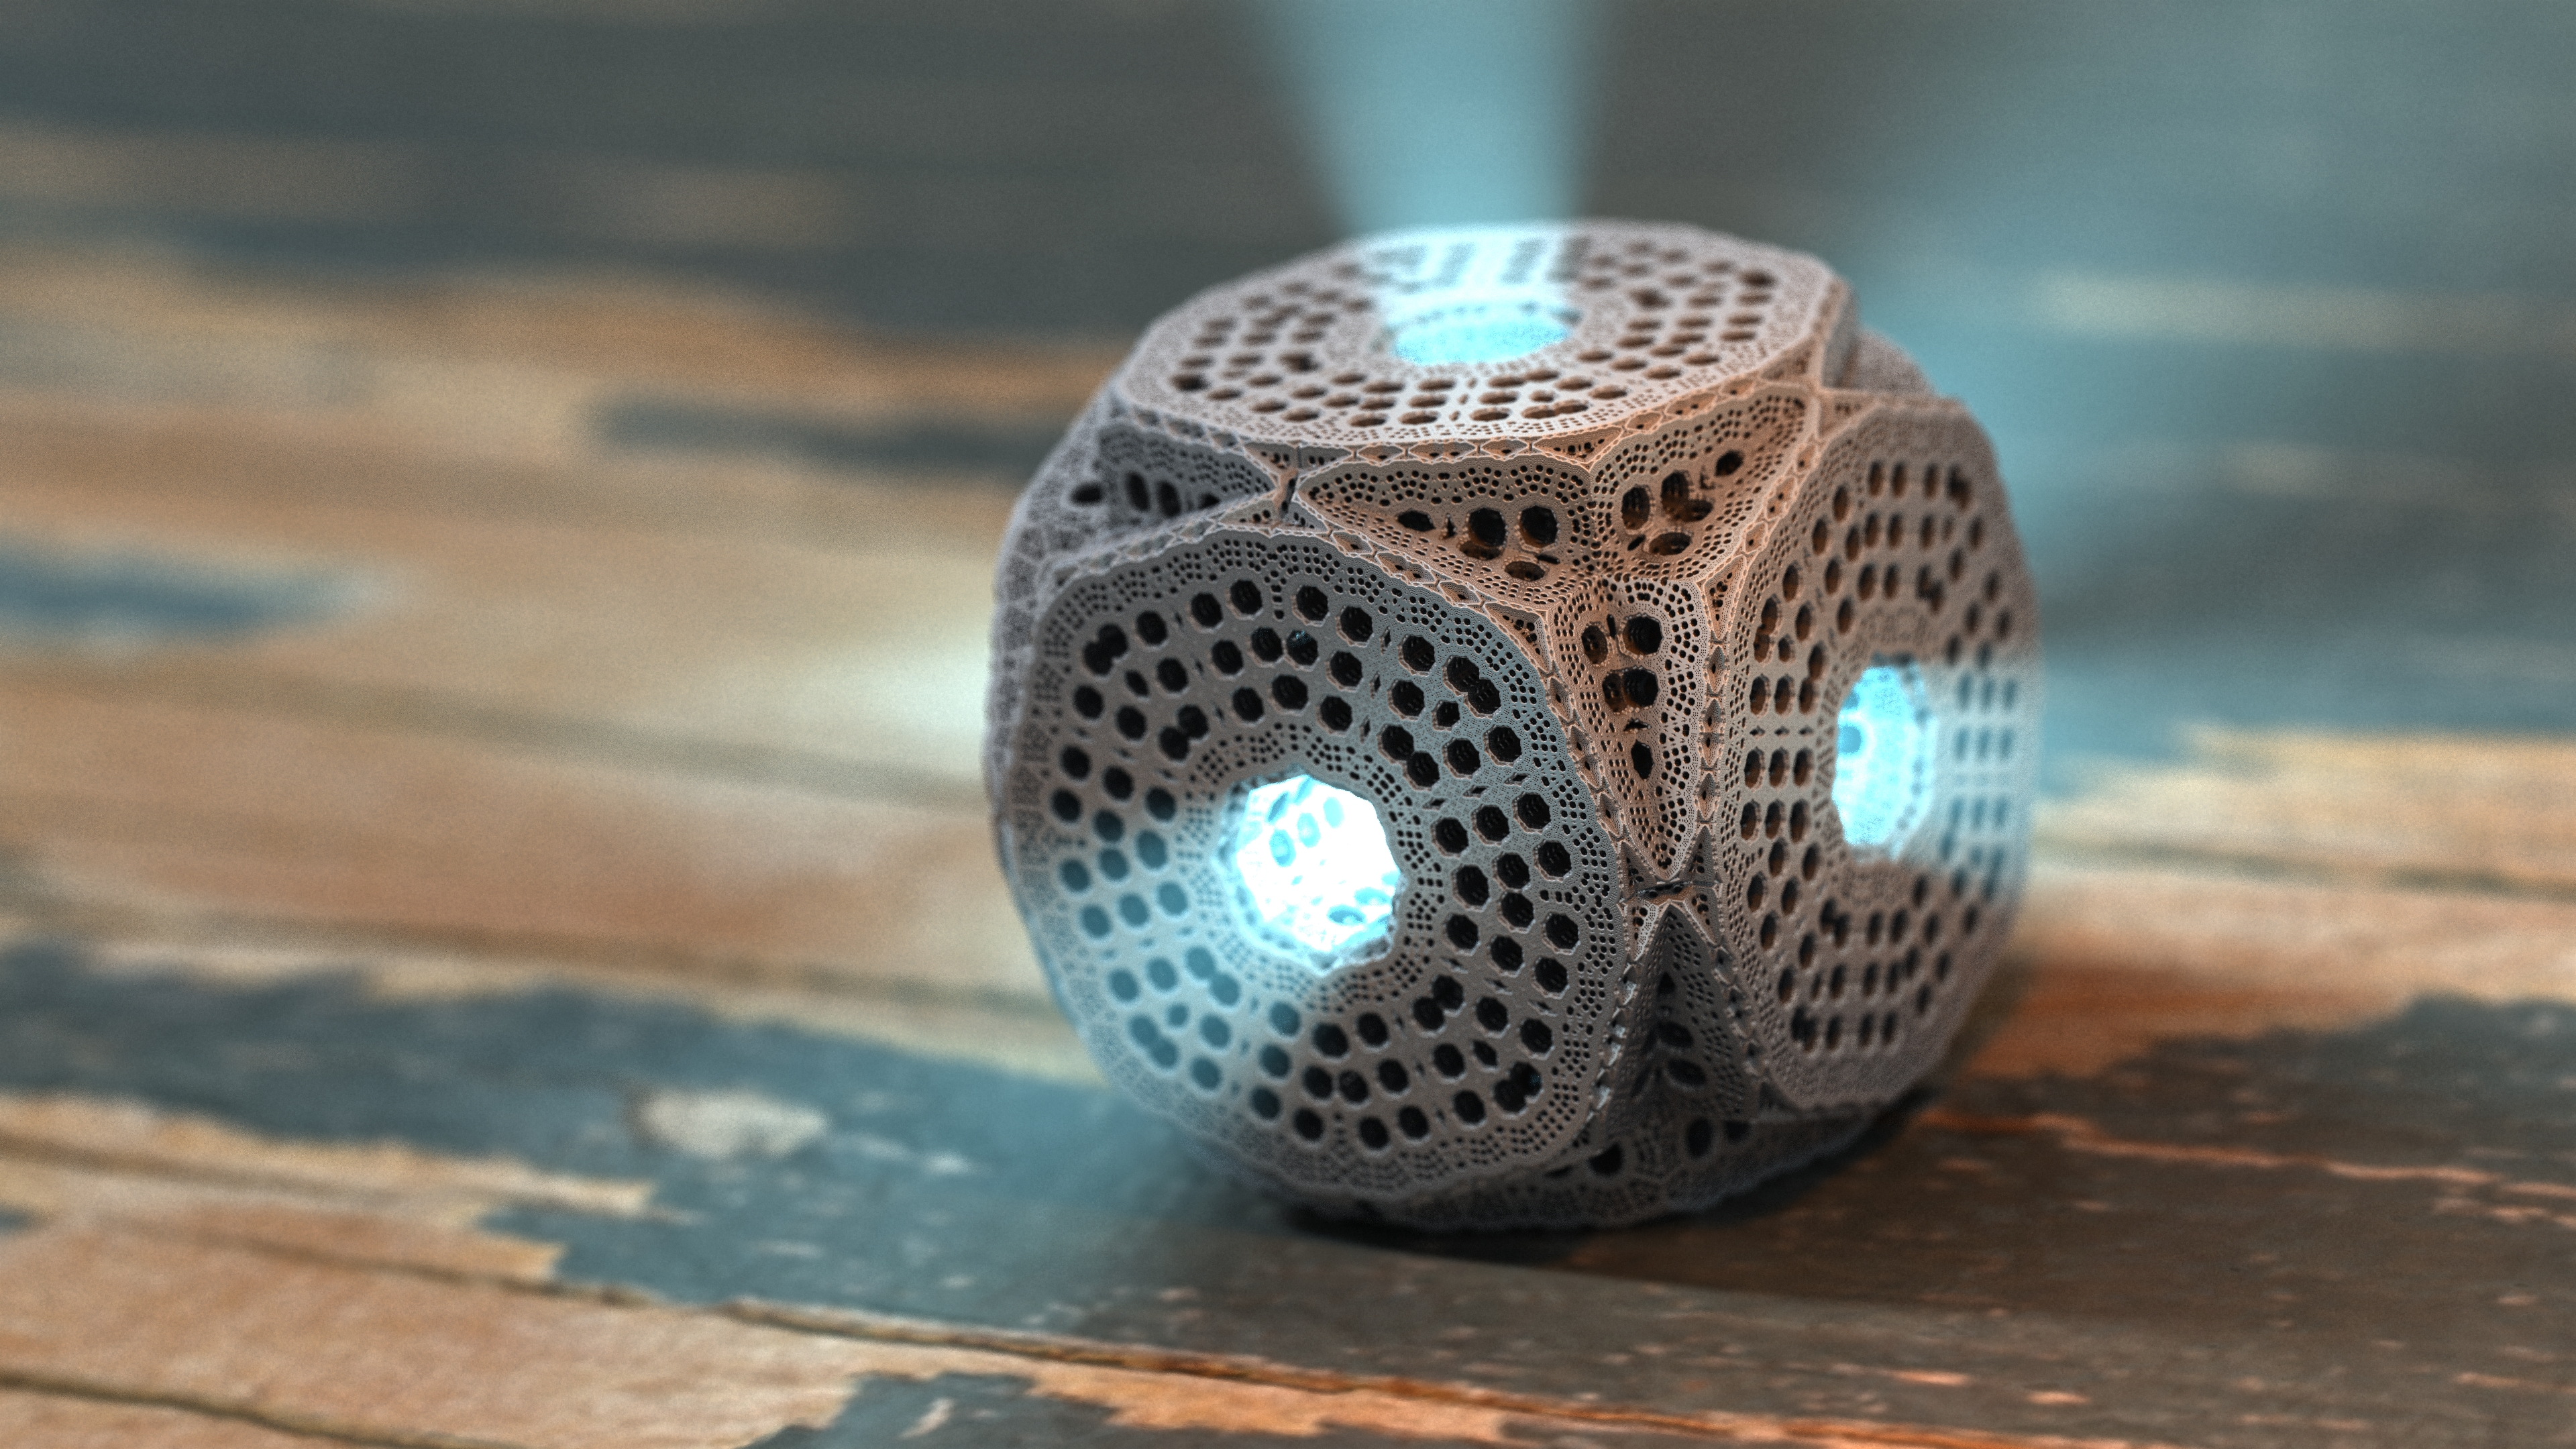 Intricate geometric sphere with illuminated patterns on wooden surface - HD desktop wallpaper.